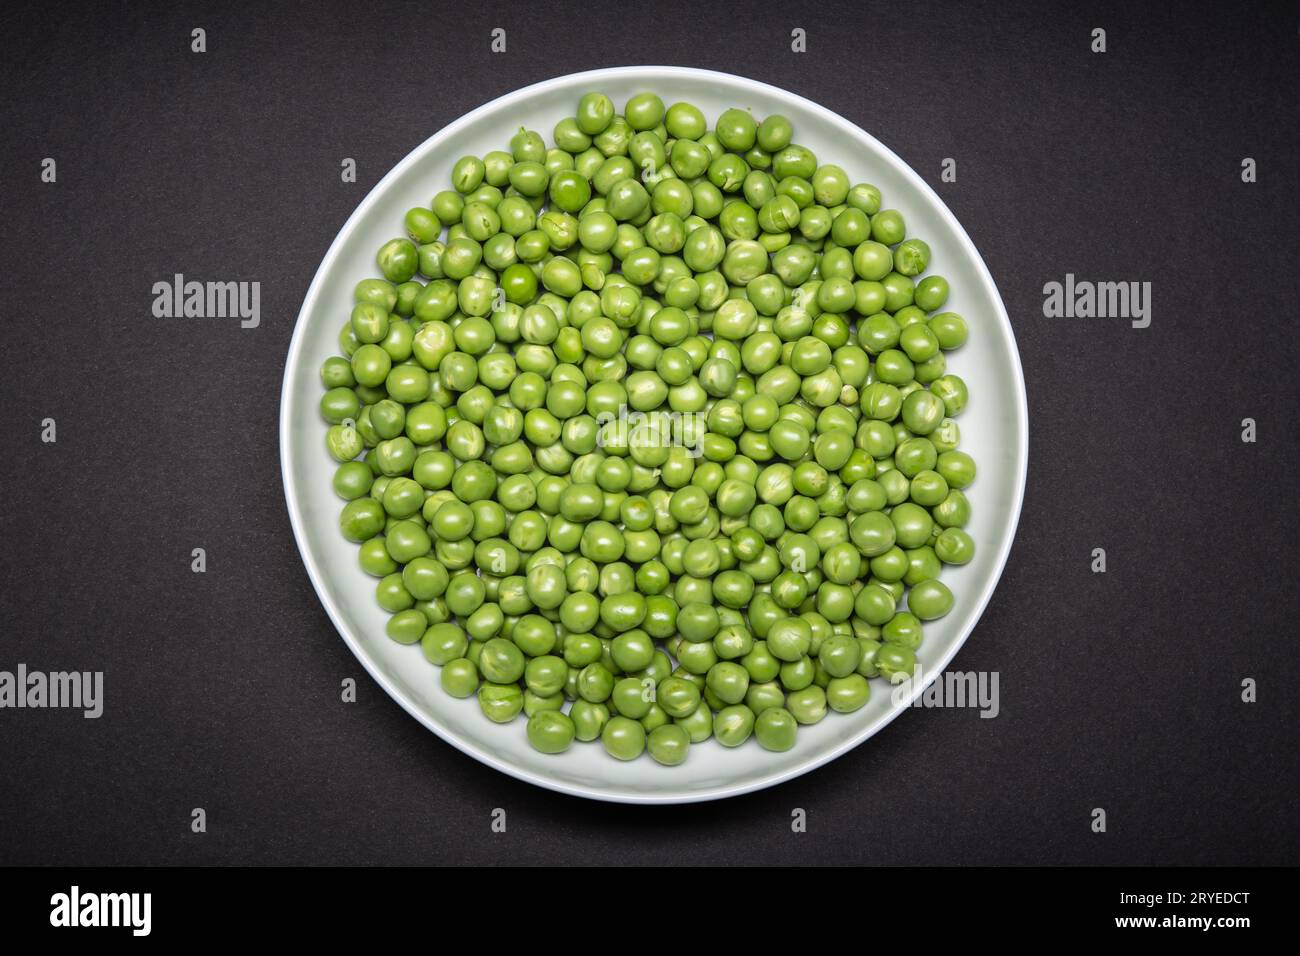 Top view of a plate with fresh Green pea isolated on black background Stock Photo